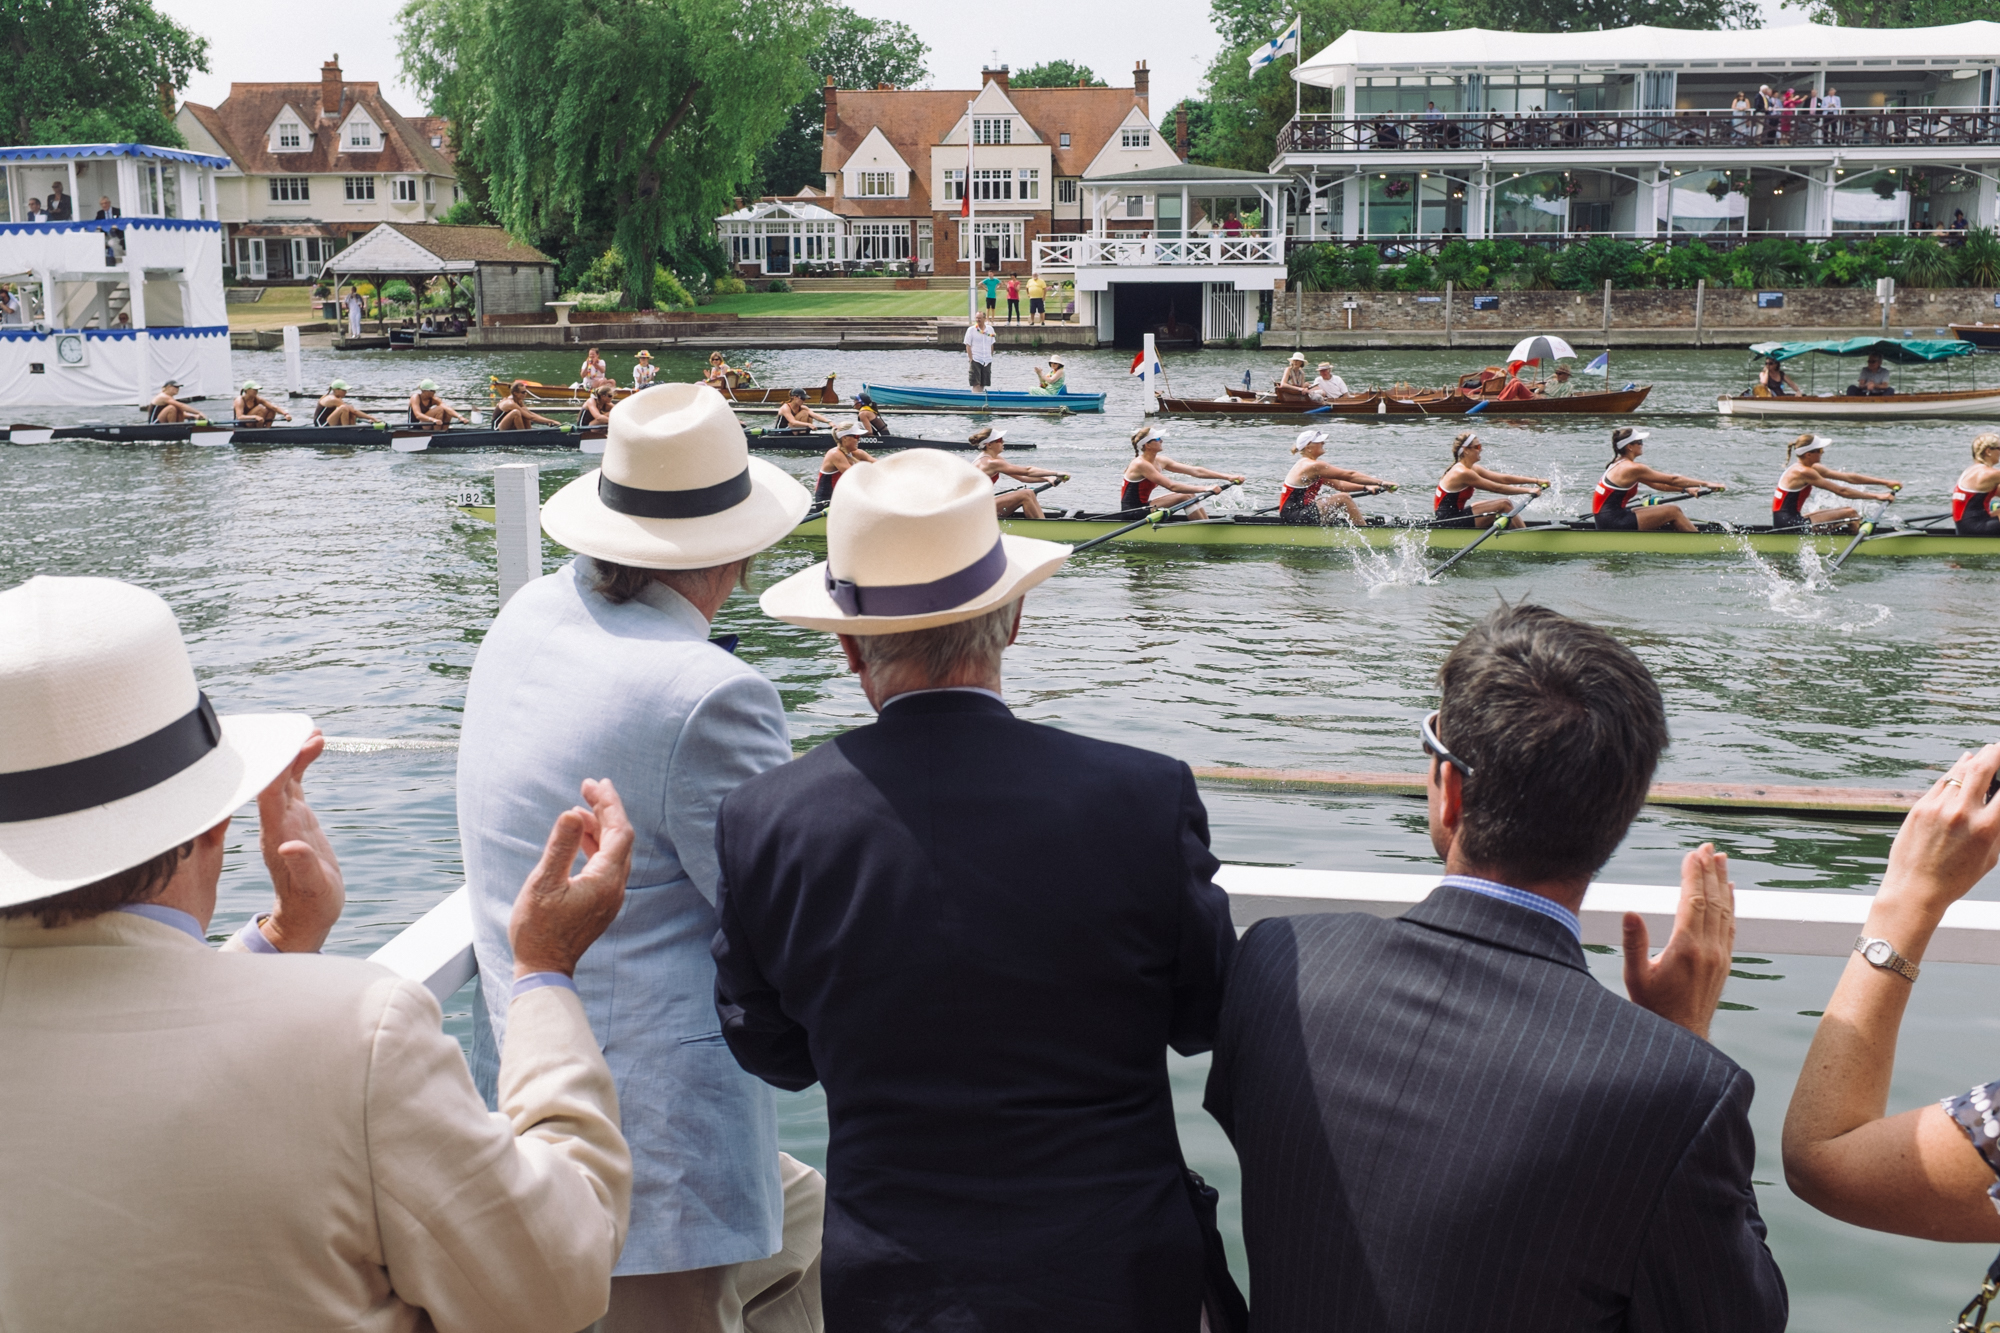  Crews race in the Remenham Challenge Cup – an event for women's eights. Woman were first allowed to compete at Henley Royal in 1993, although the number of events open to them today is still less than is available for men. 